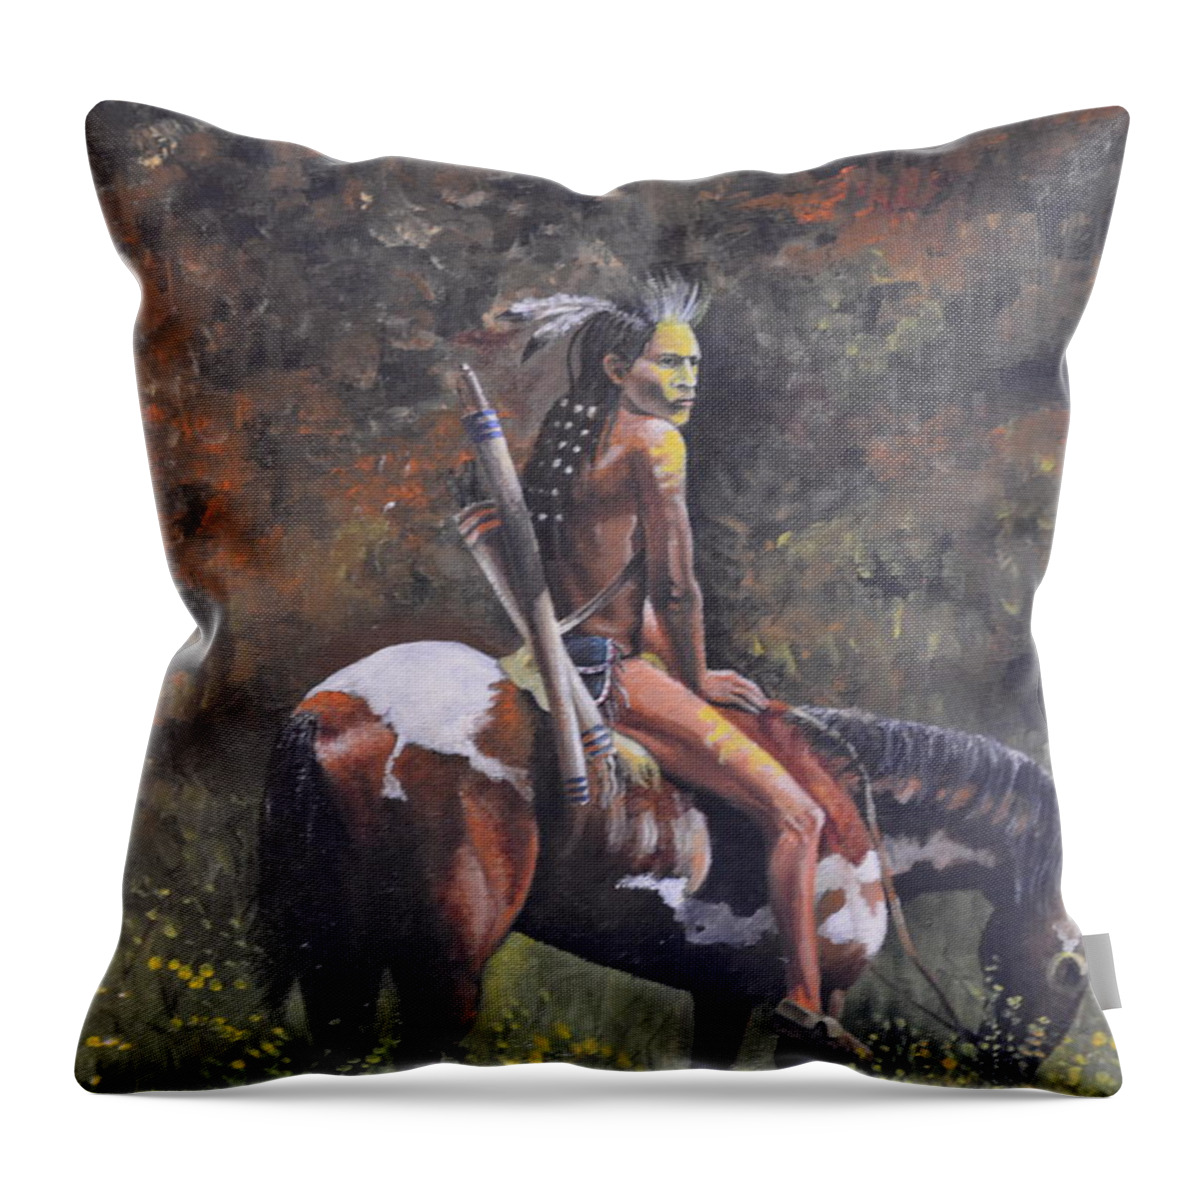 American Indian Sitting On A Painted Pony In The Woods Throw Pillow featuring the painting Painted Pony by Martin Schmidt